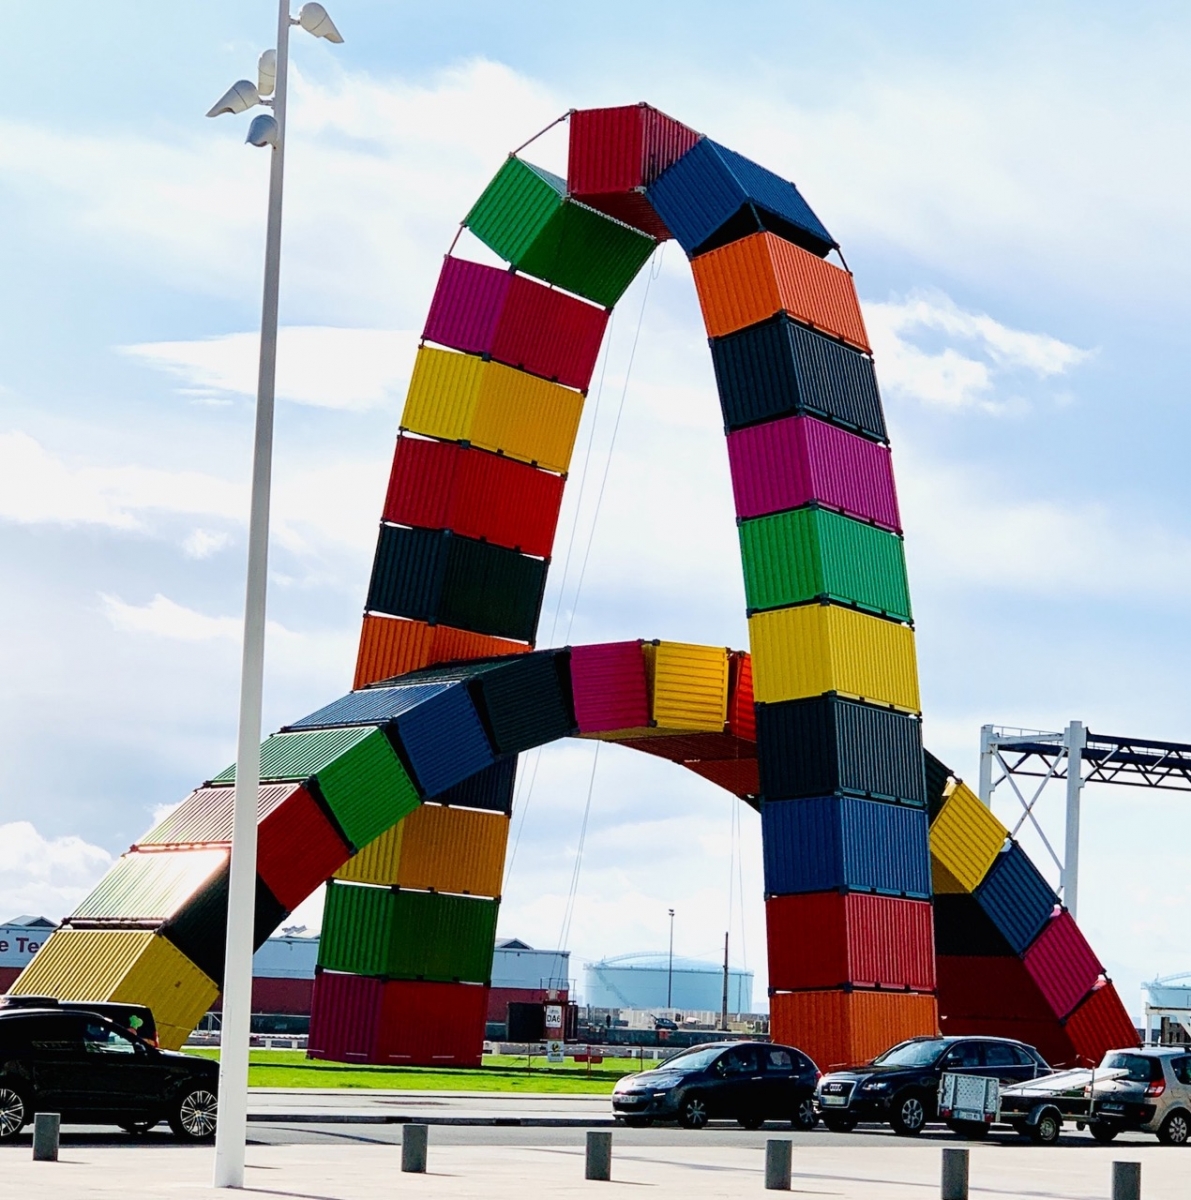 The 'Catene of Containers' is an art installation of container arcs in Le Havre, France